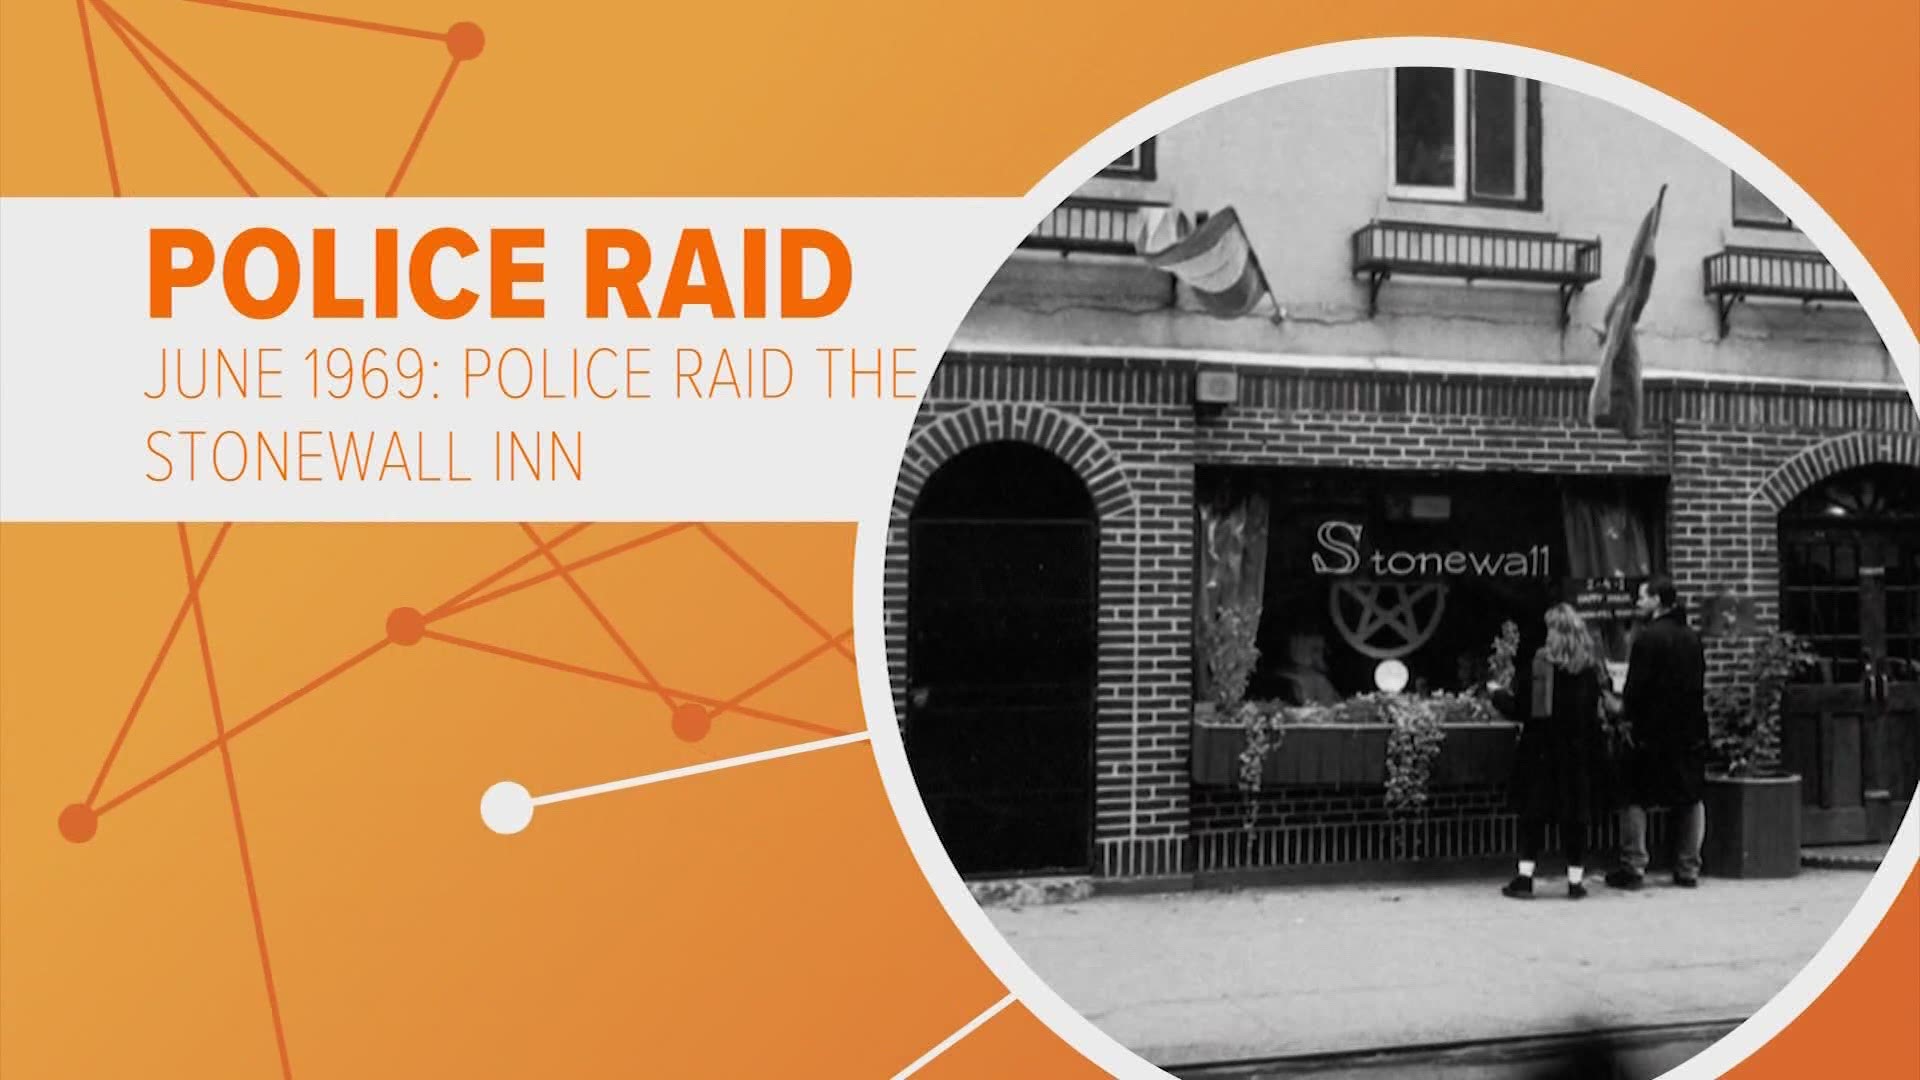 It all started at the Stonewall Inn in New York City more than 50 years ago, but it wasn't a celebration— it was a raid.